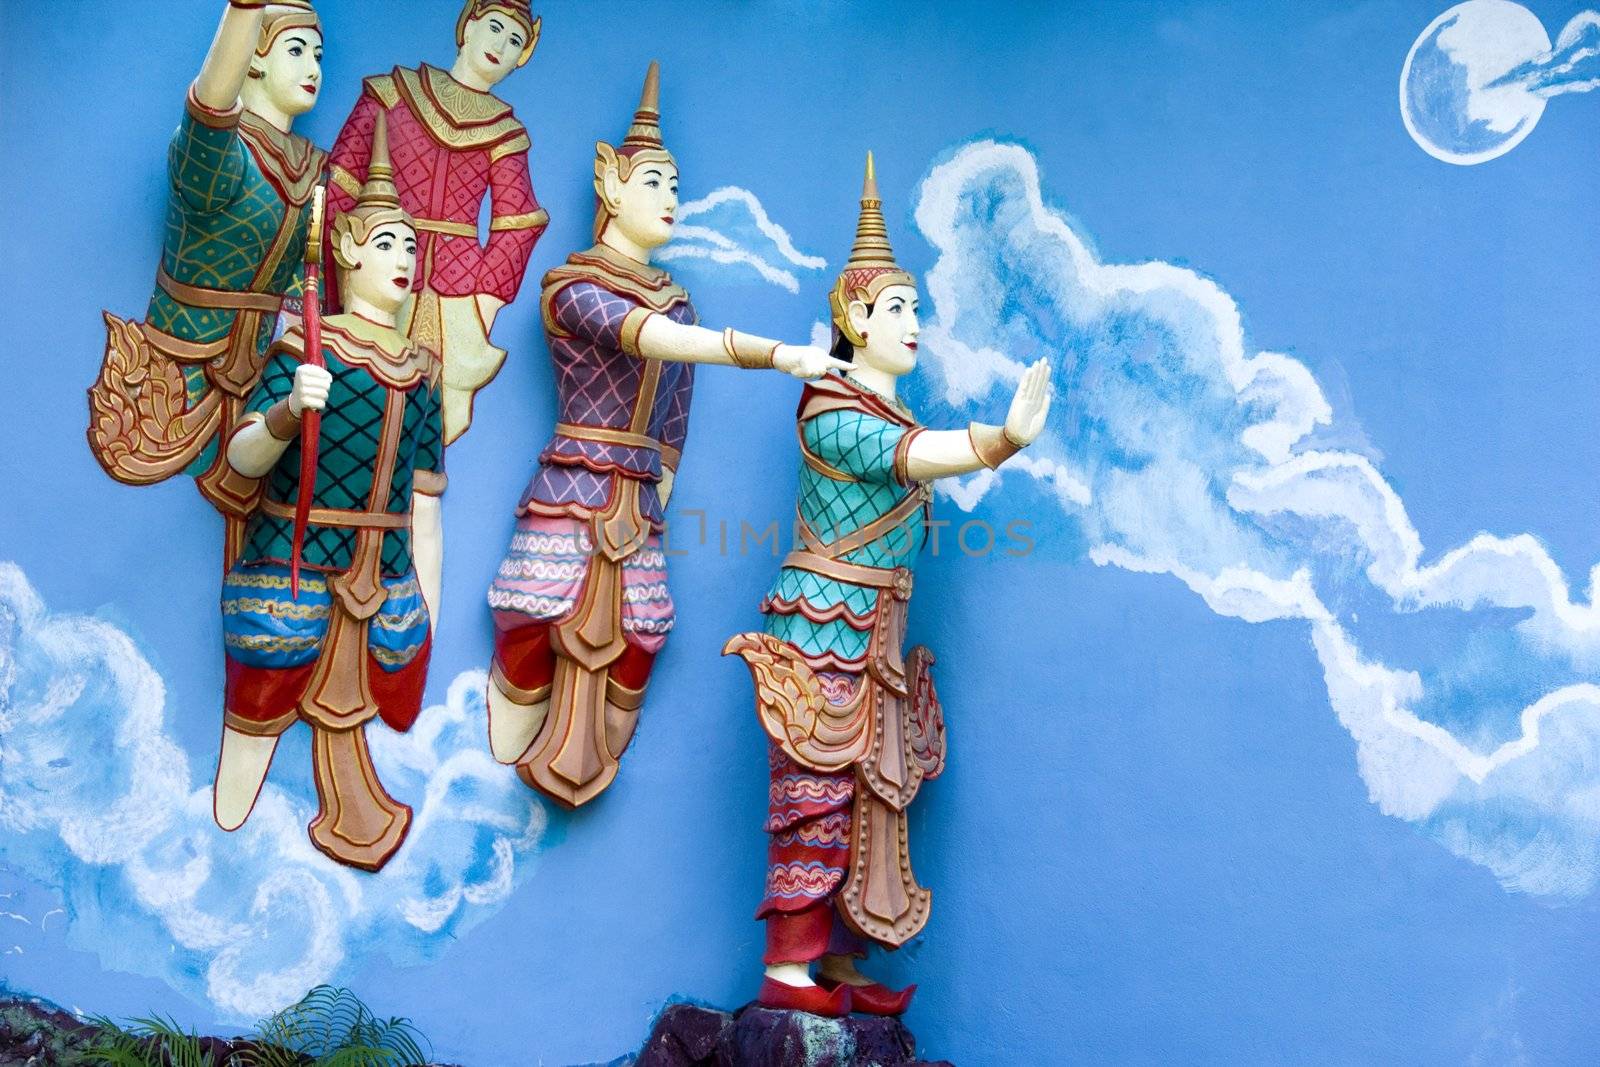 Unique wall sculpture found at a Burmese Buddhist temple.